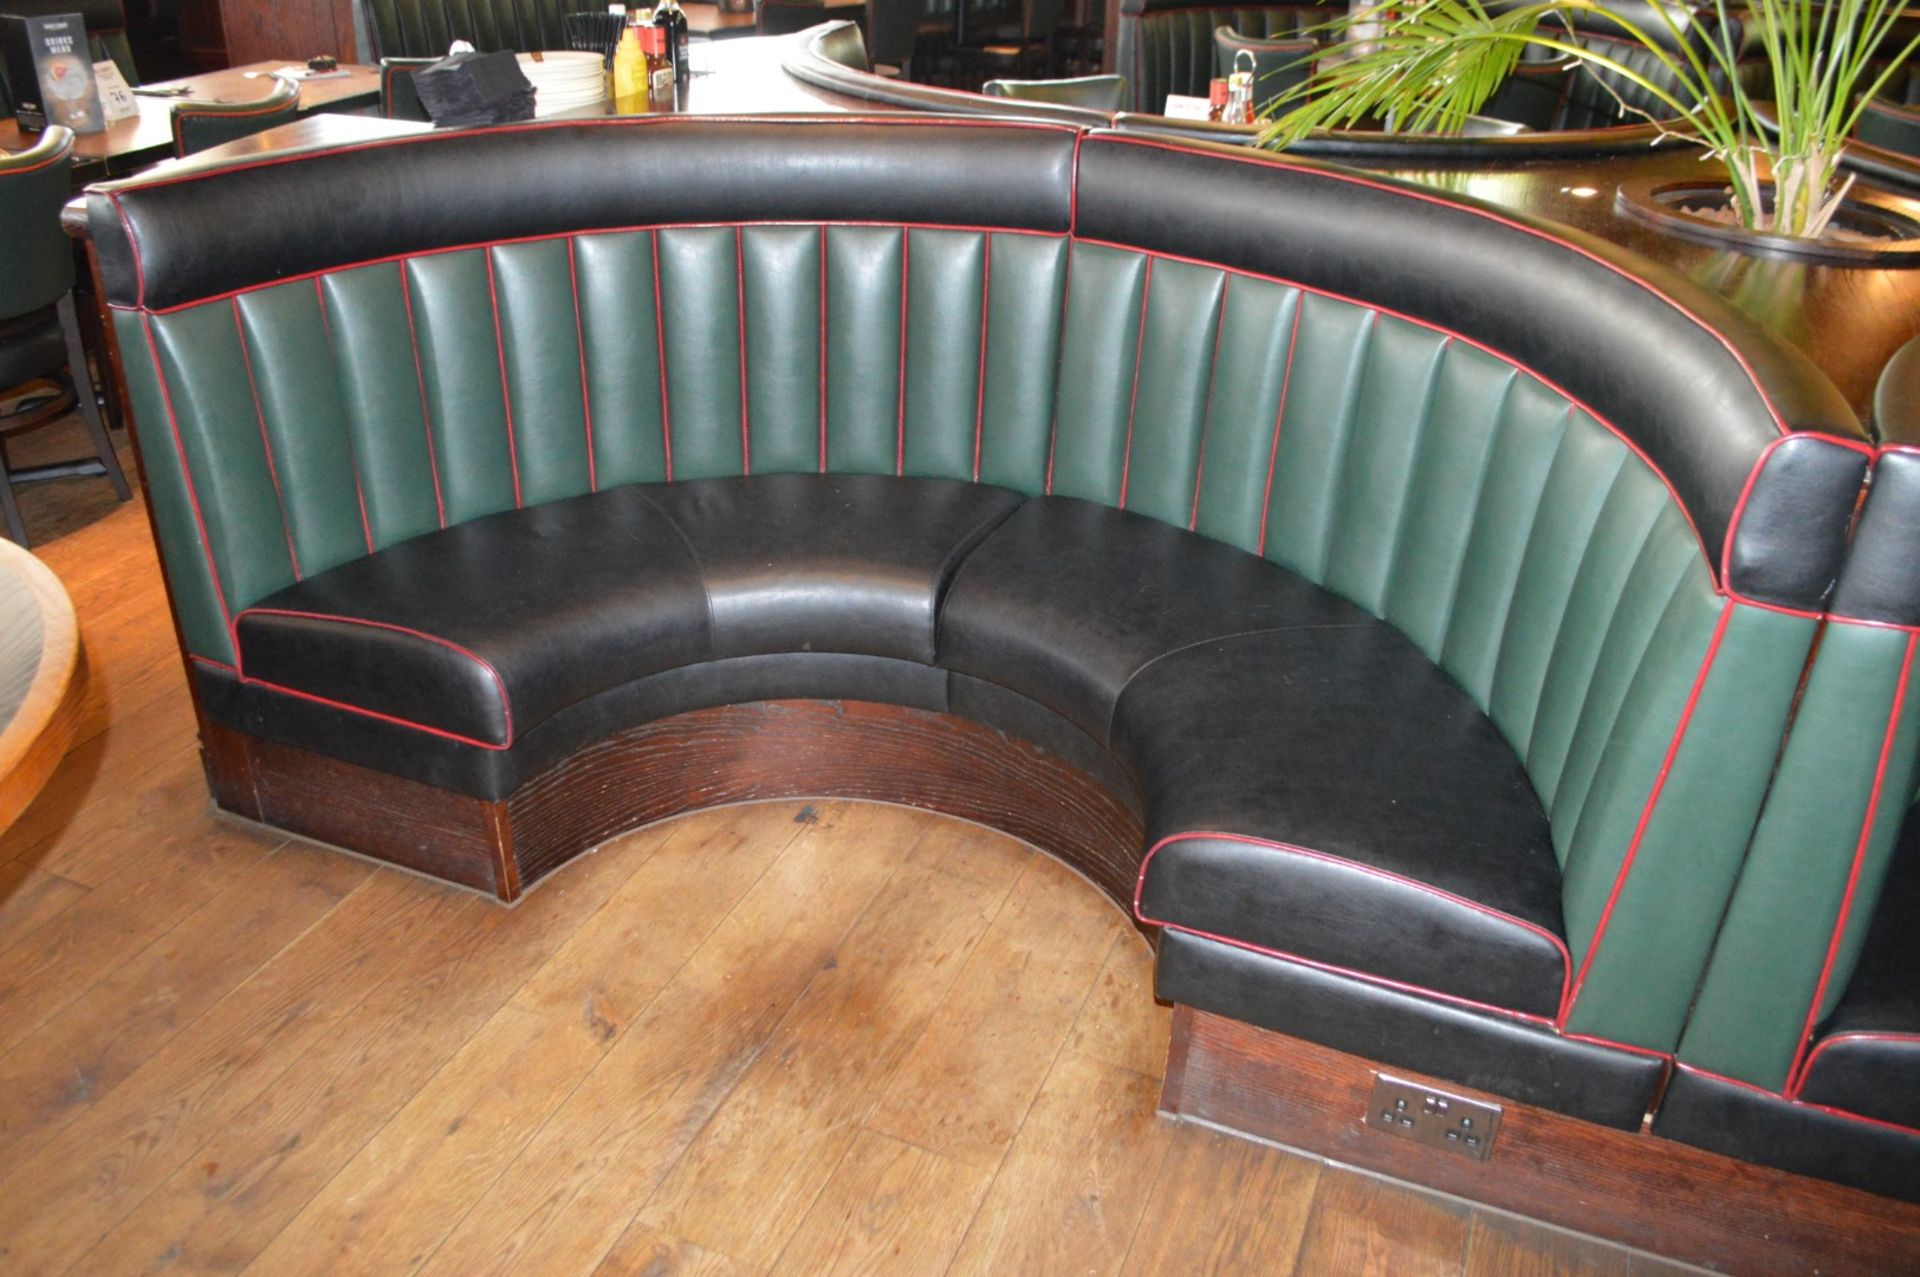 8 x Contemporary Half Circle Seating Booths Waitress Point and Wood Paneling - Features a Leather - Image 13 of 17